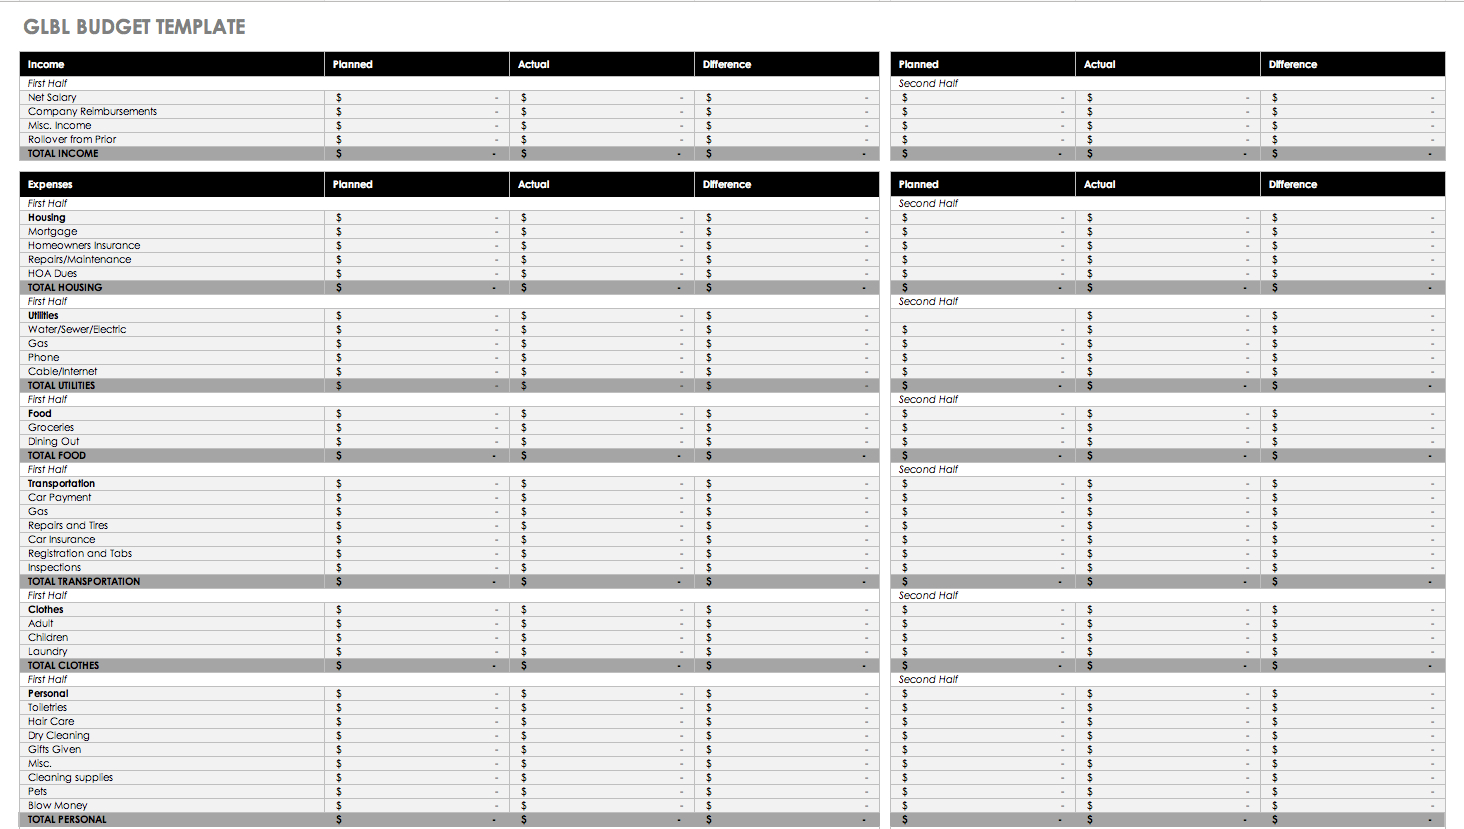 Hoa Budget Spreadsheet Throughout Free Budget Templates In Excel For Any Use